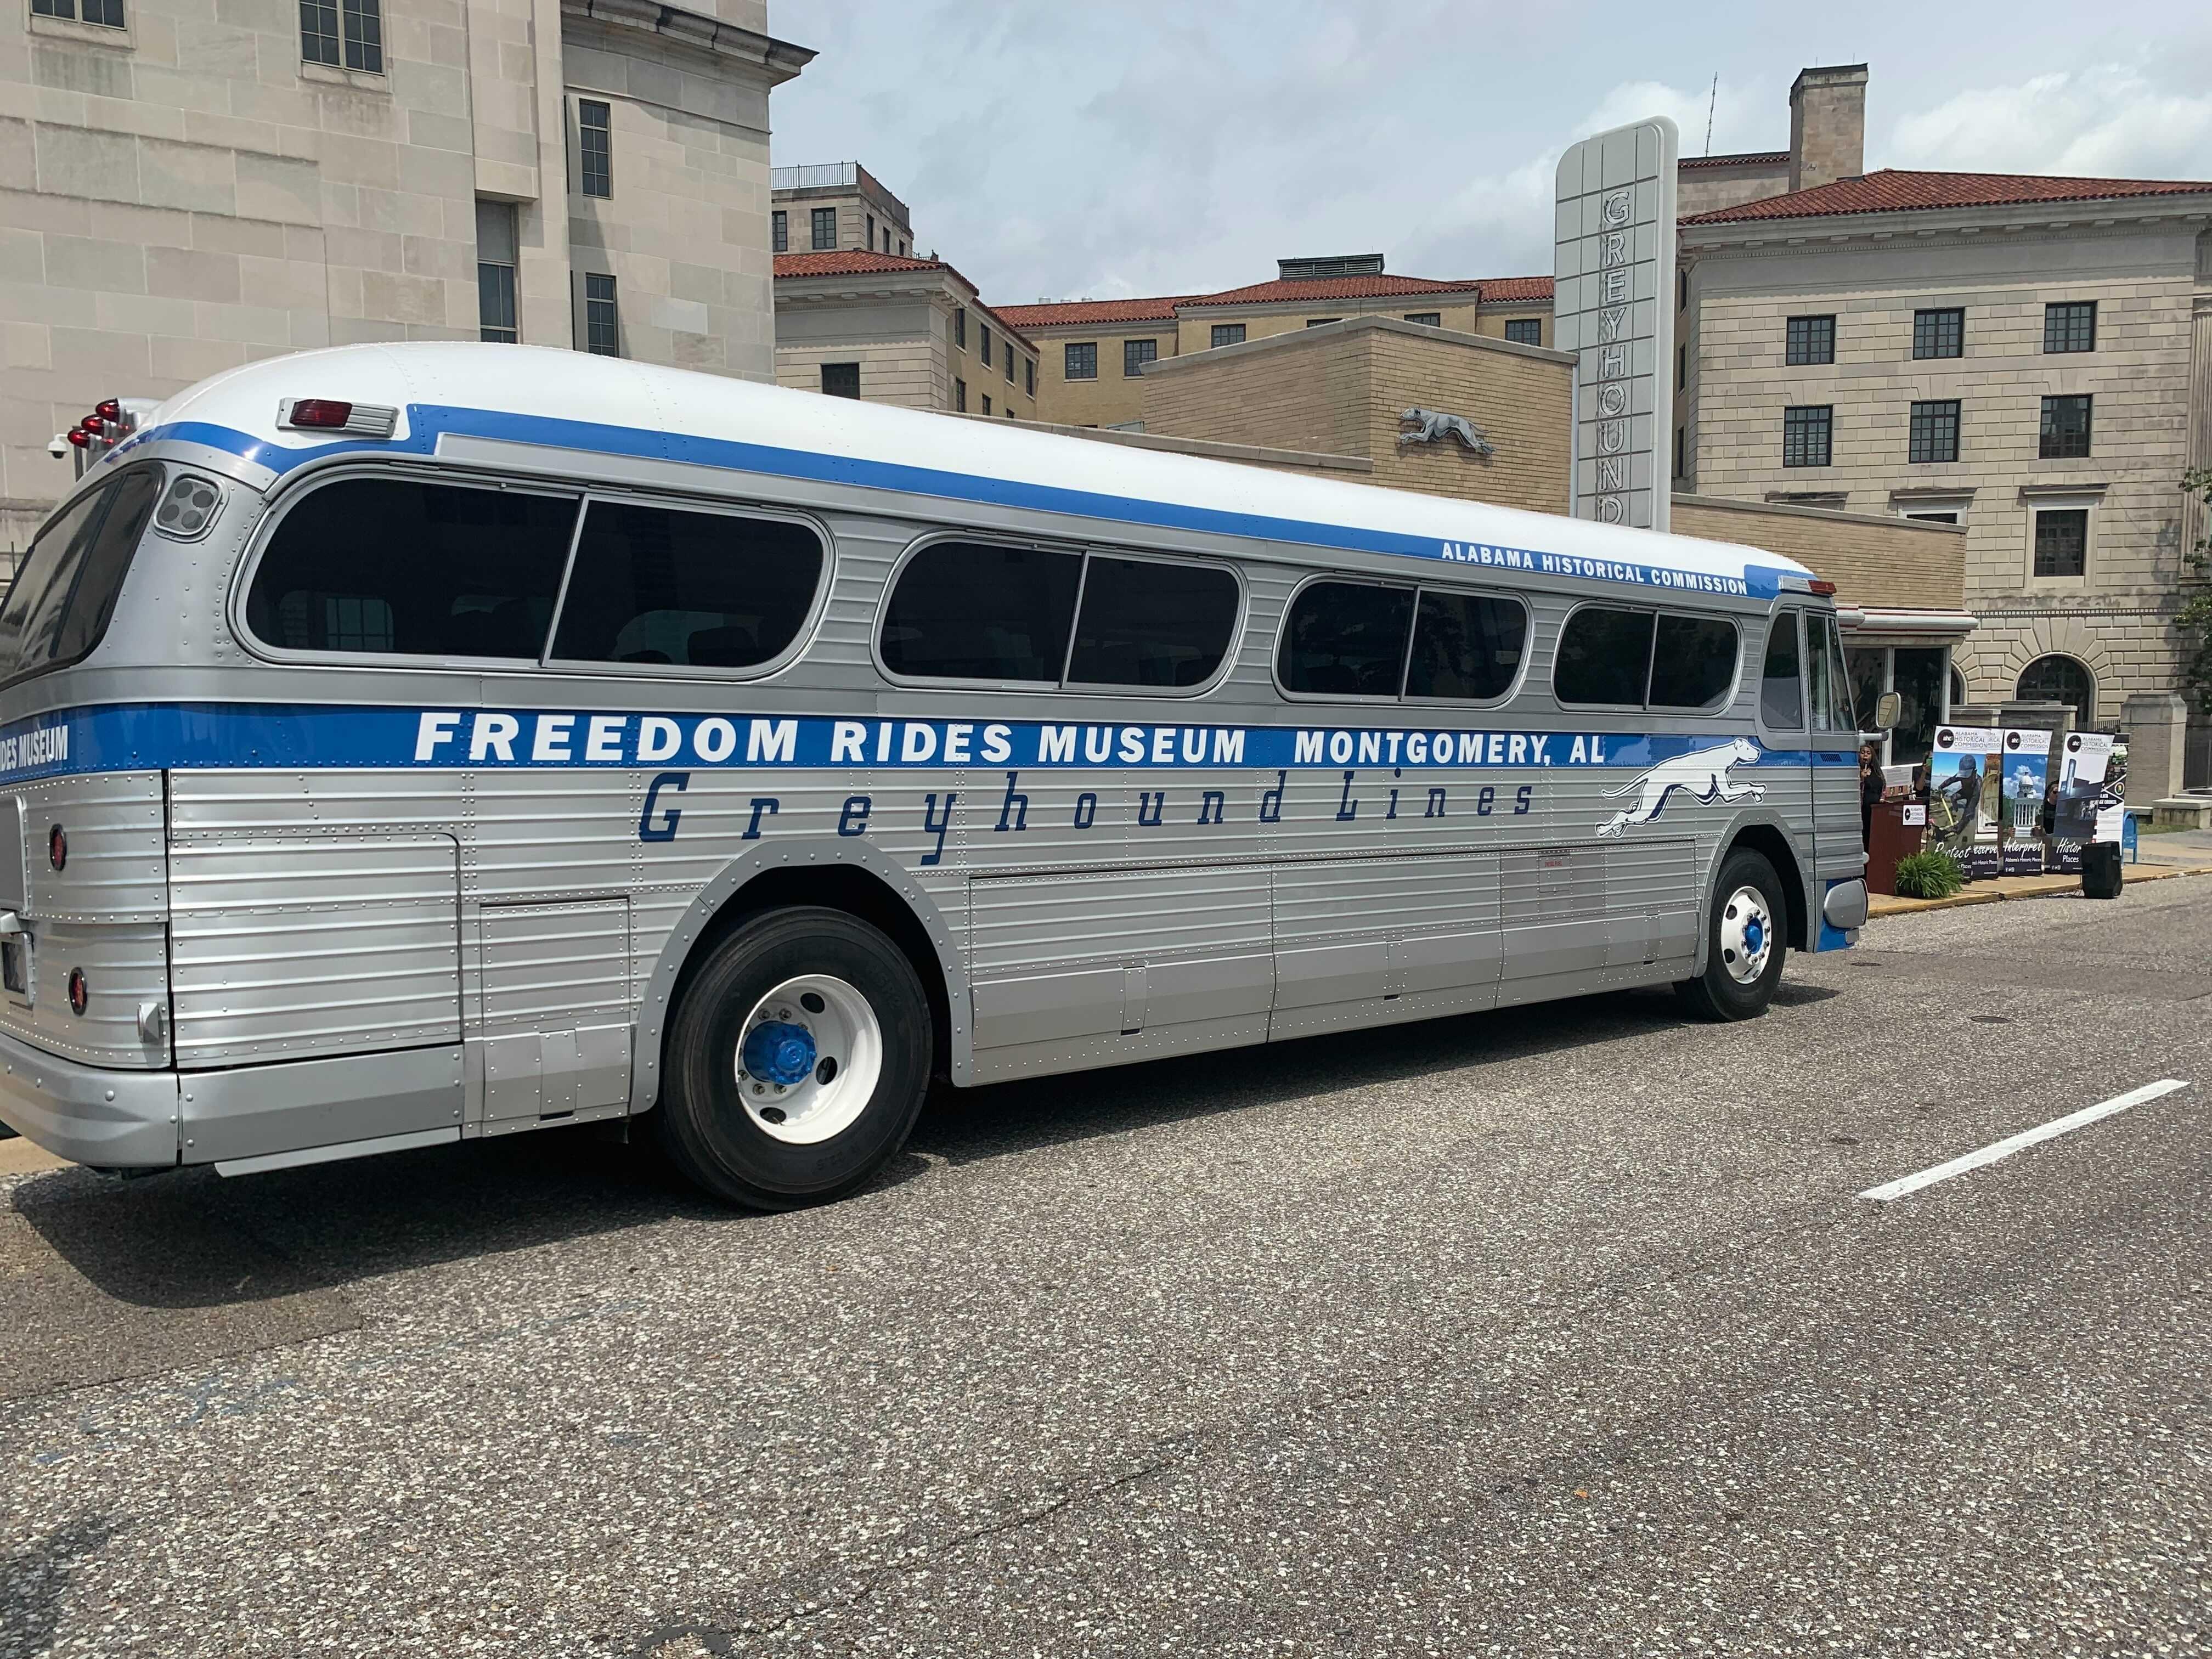 when-buses-were-a-comin-remembering-the-freedom-riders-60-years-on